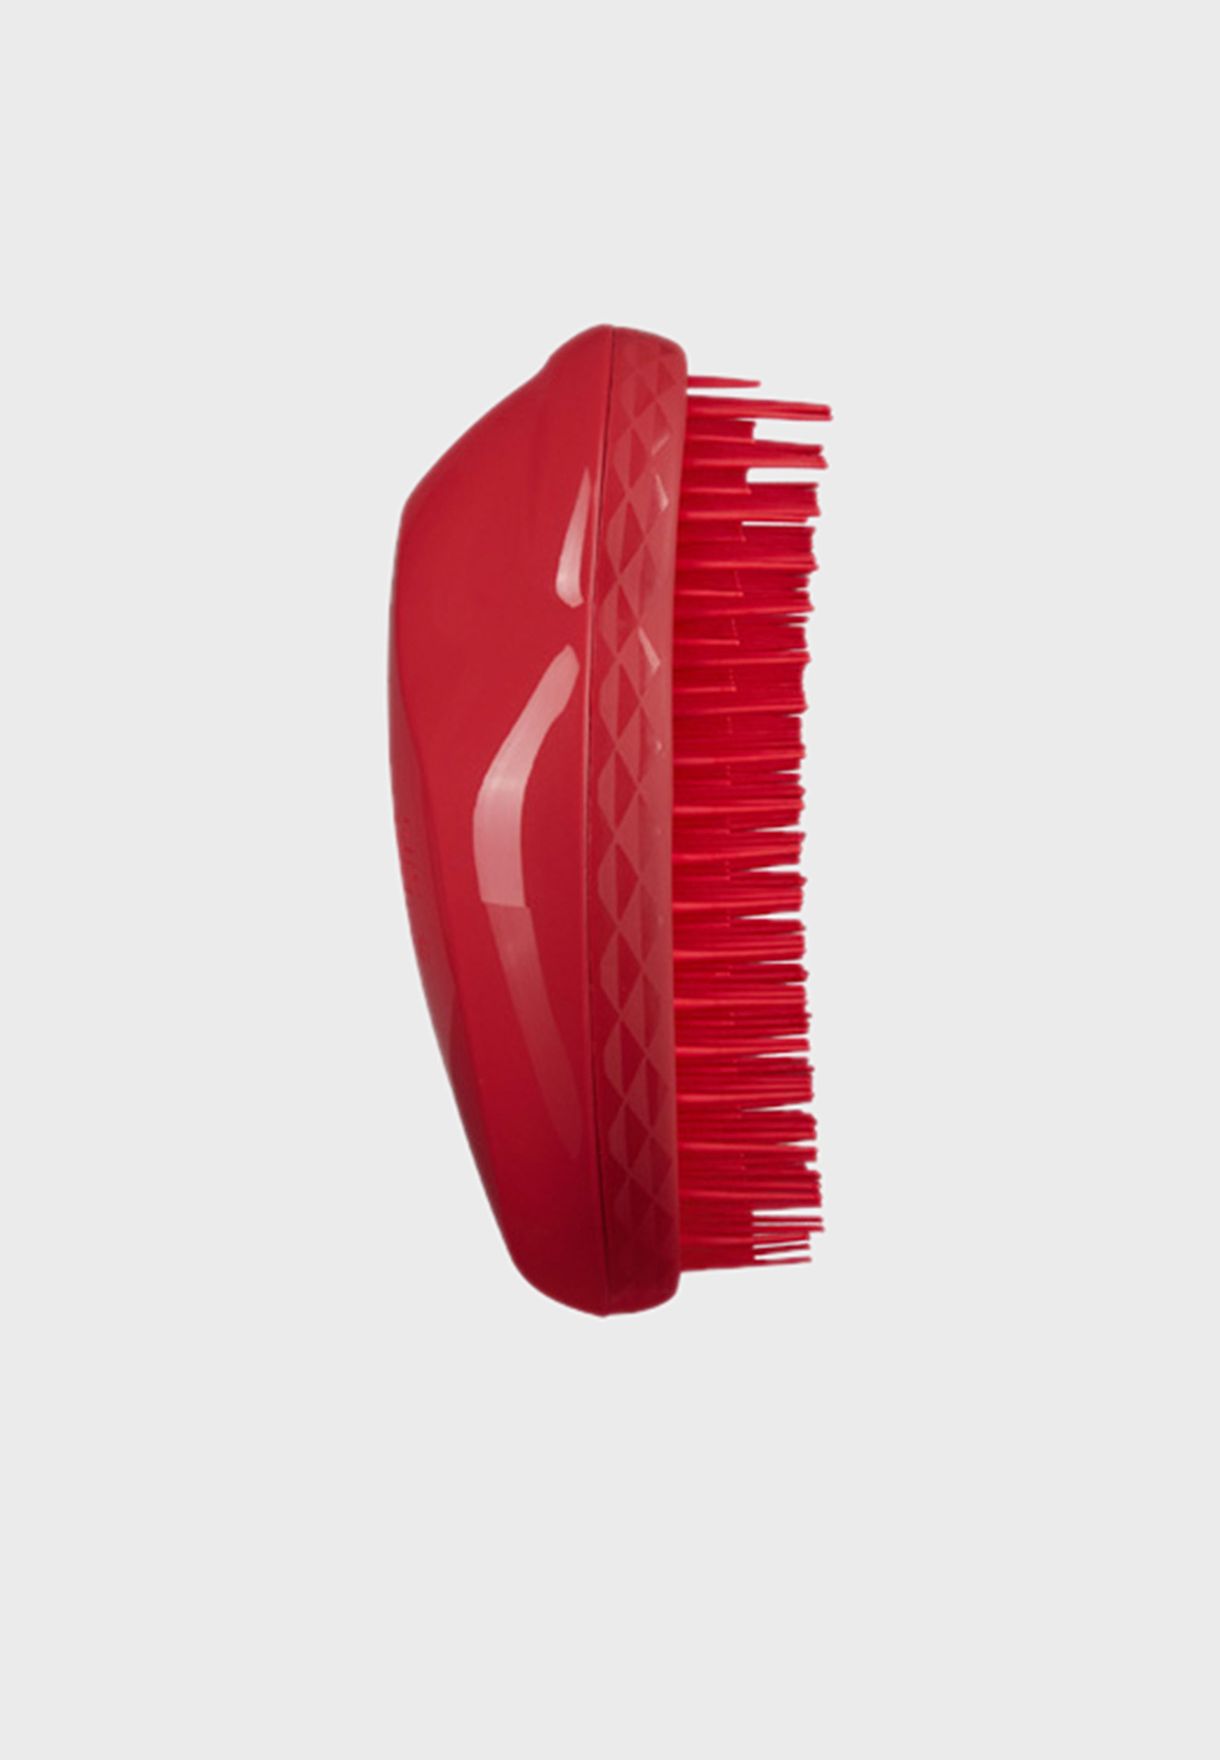 Thick & Curly Detangling Hairbrush